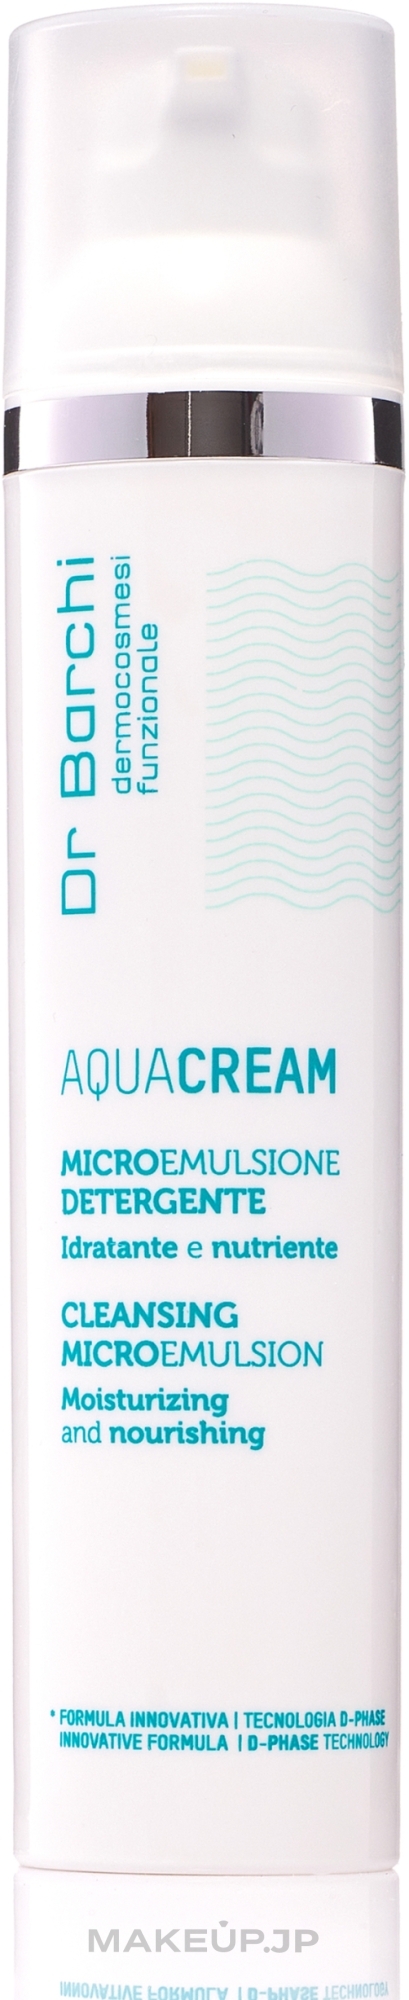 Face, Neck & Decollete Cleansing Microemulsion - Dr Barchi Aqua Cream Cleansing Microemulsion — photo 100 ml